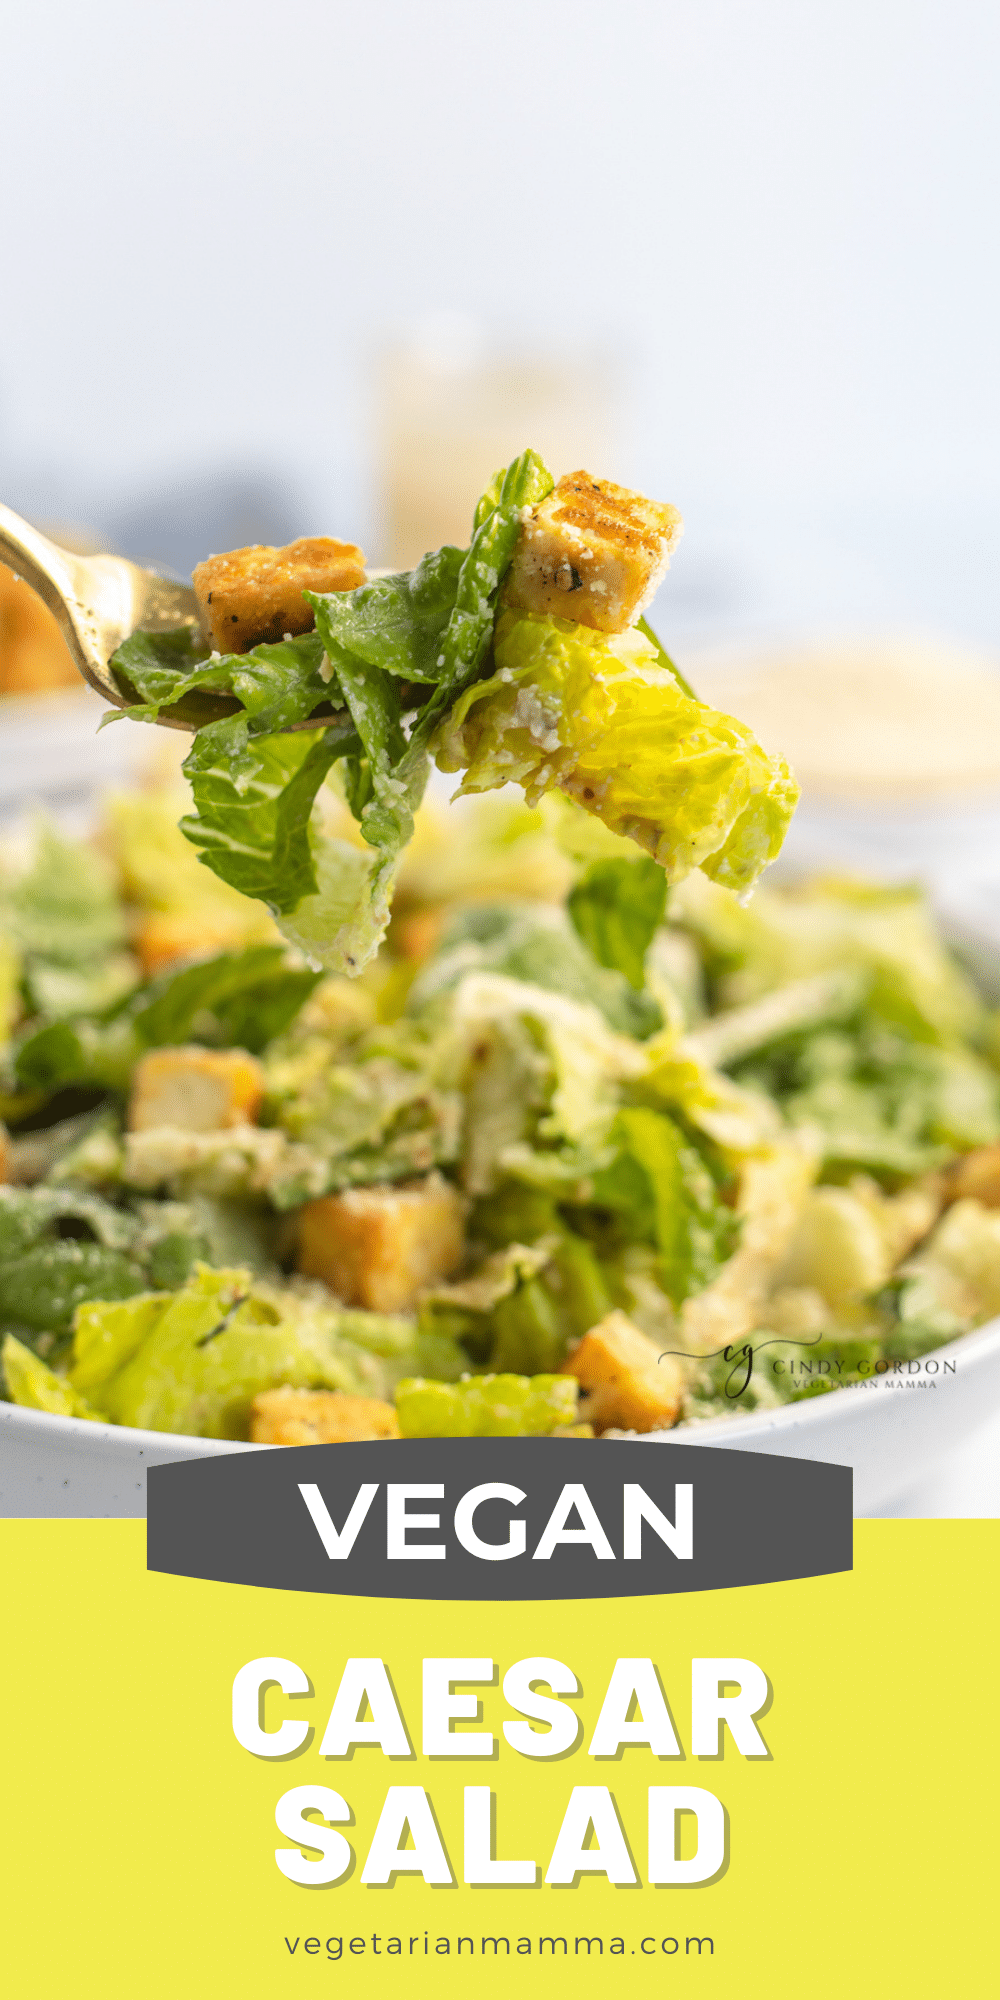 Vegan Caesar salad is crunchy, tangy, and creamy with all plant-based ingredients. Add crumbly vegan Parmesan cheese and crispy tofu croutons to the mix for the best salad ever.